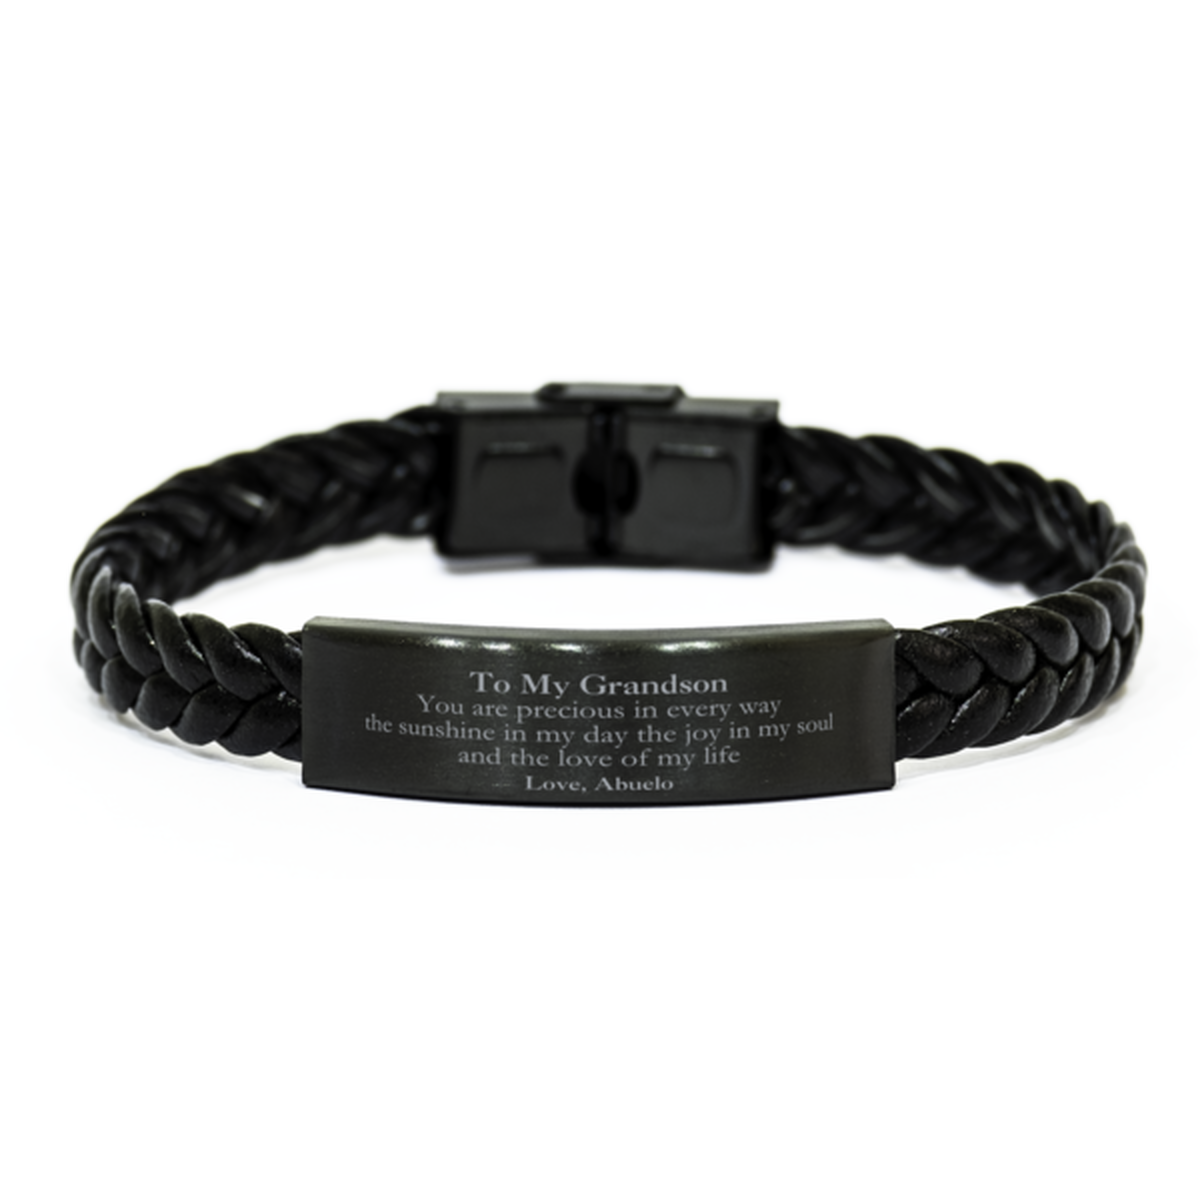 Graduation Gifts for Grandson Braided Leather Bracelet Present from Abuelo, Christmas Grandson Birthday Gifts Grandson You are precious in every way the sunshine in my day. Love, Abuelo